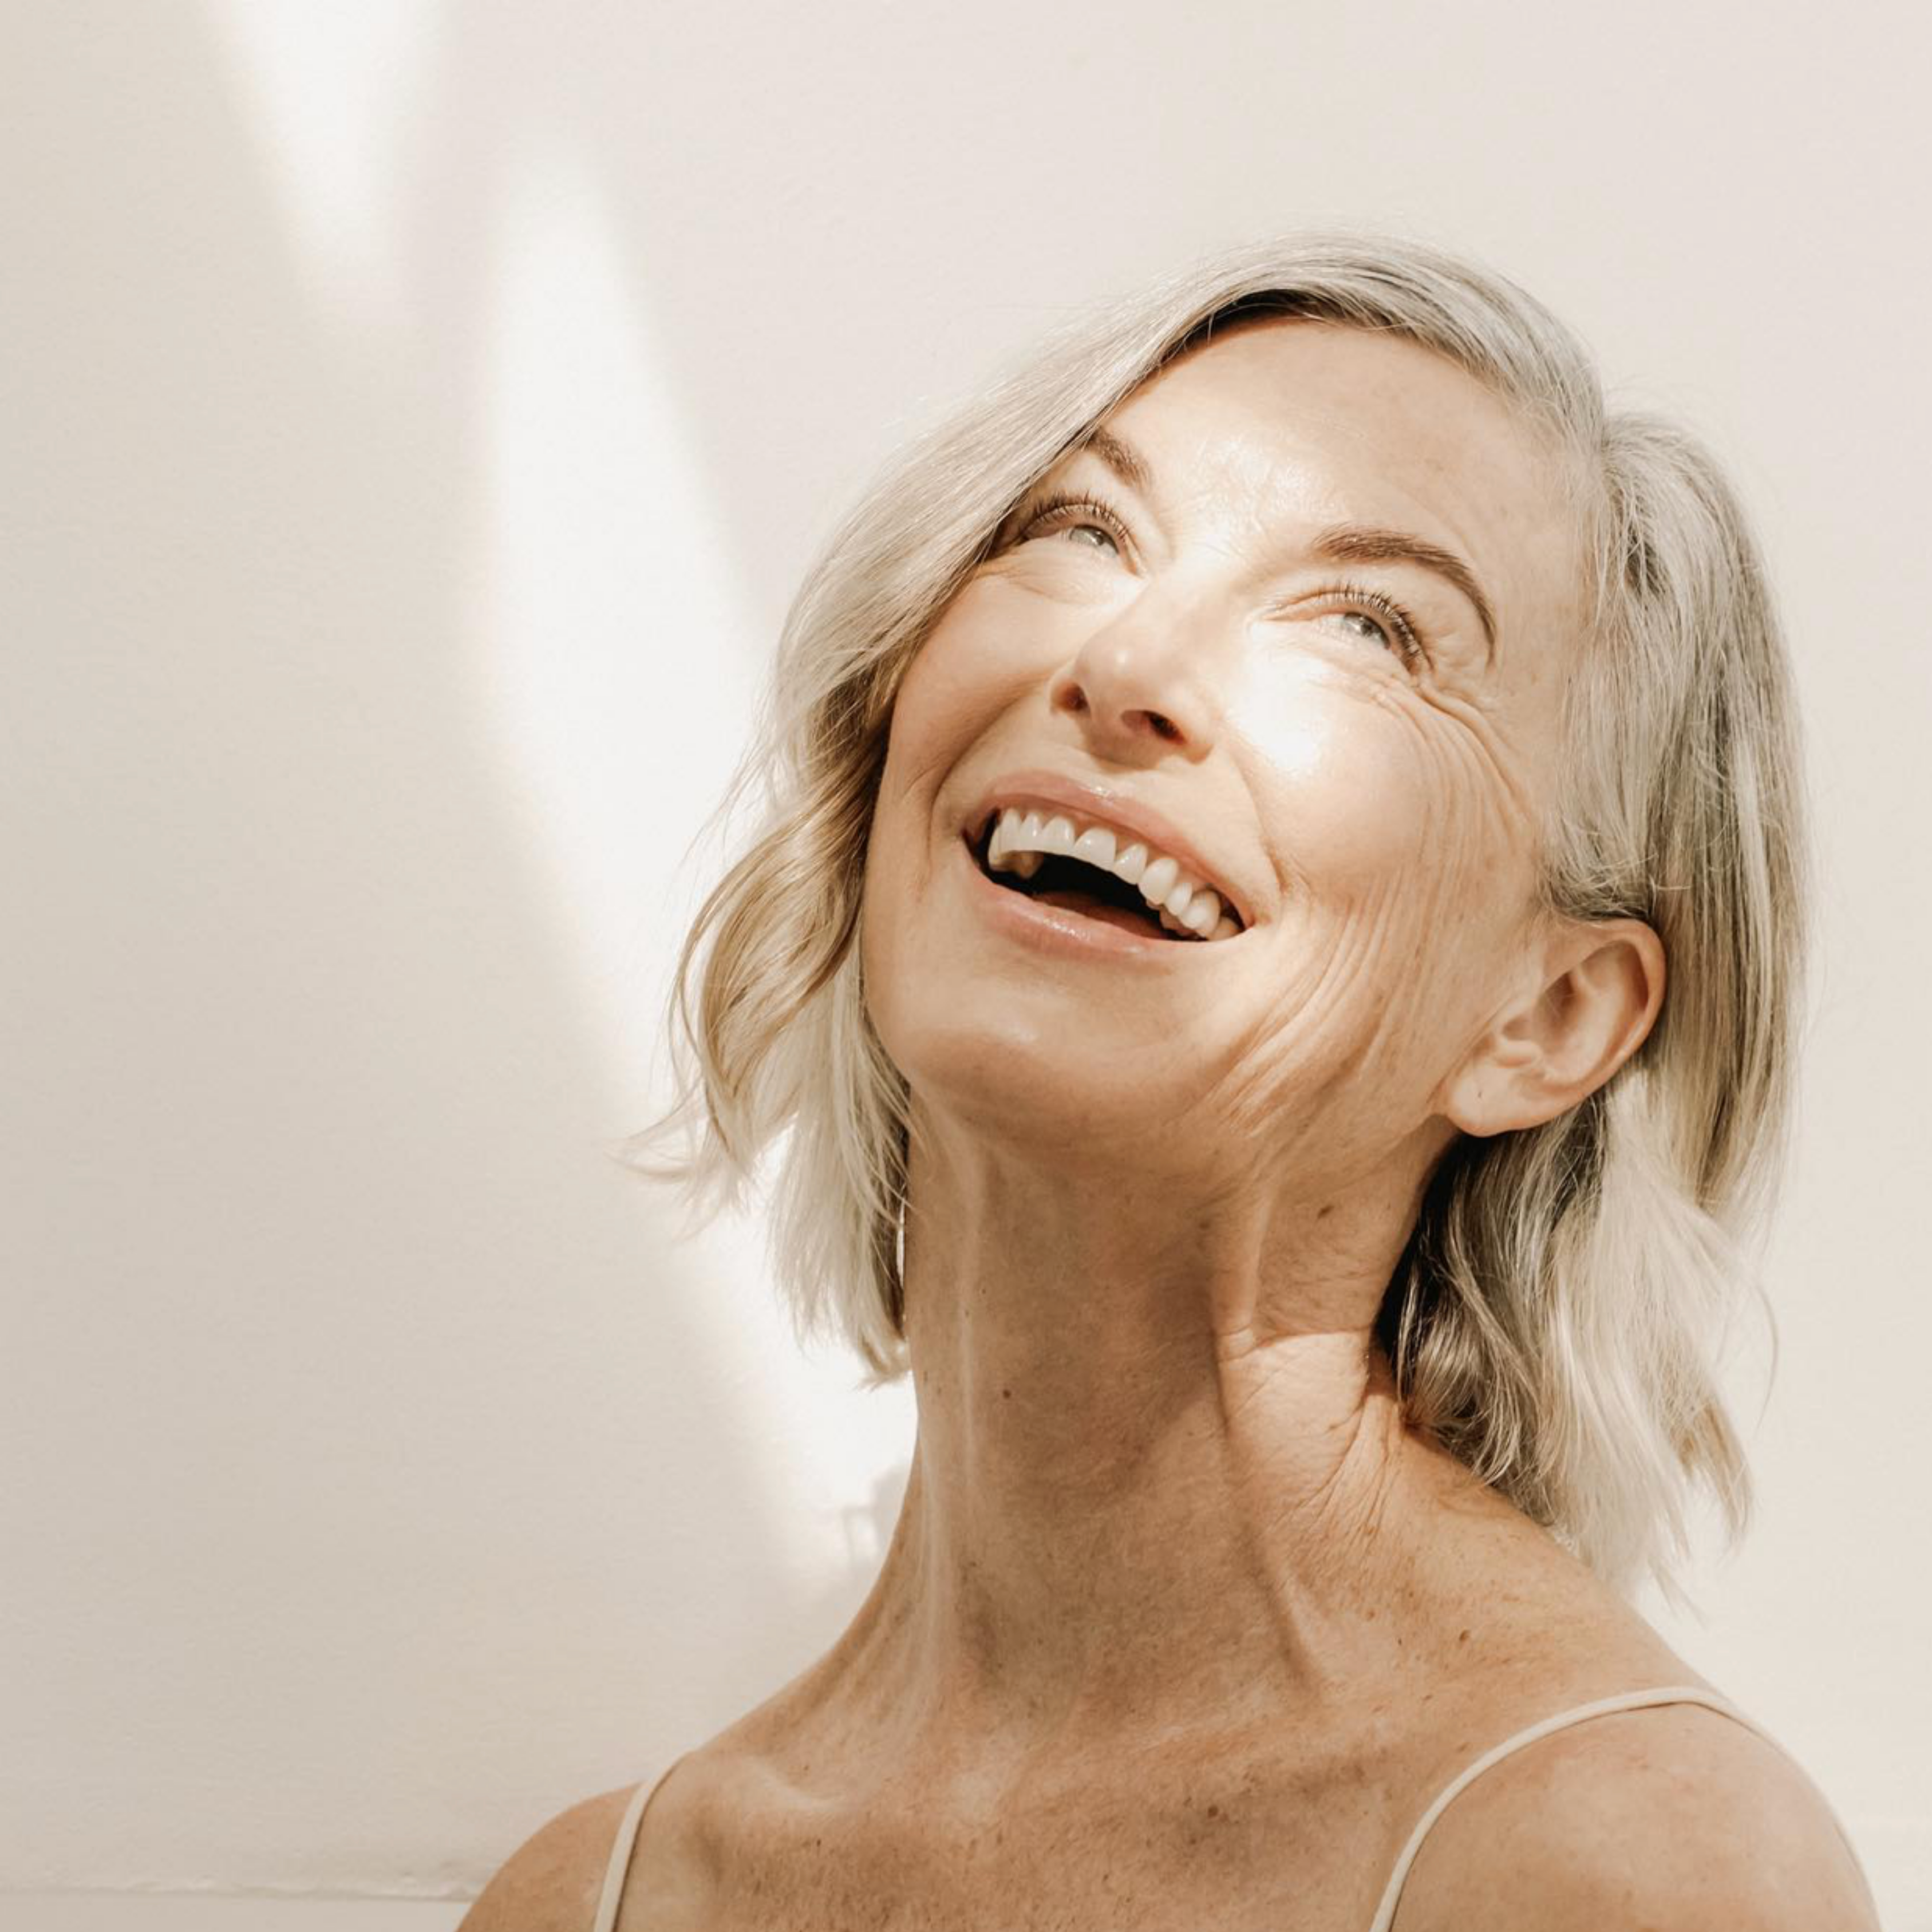 tried & true (anti) aging champions that make your skin glow